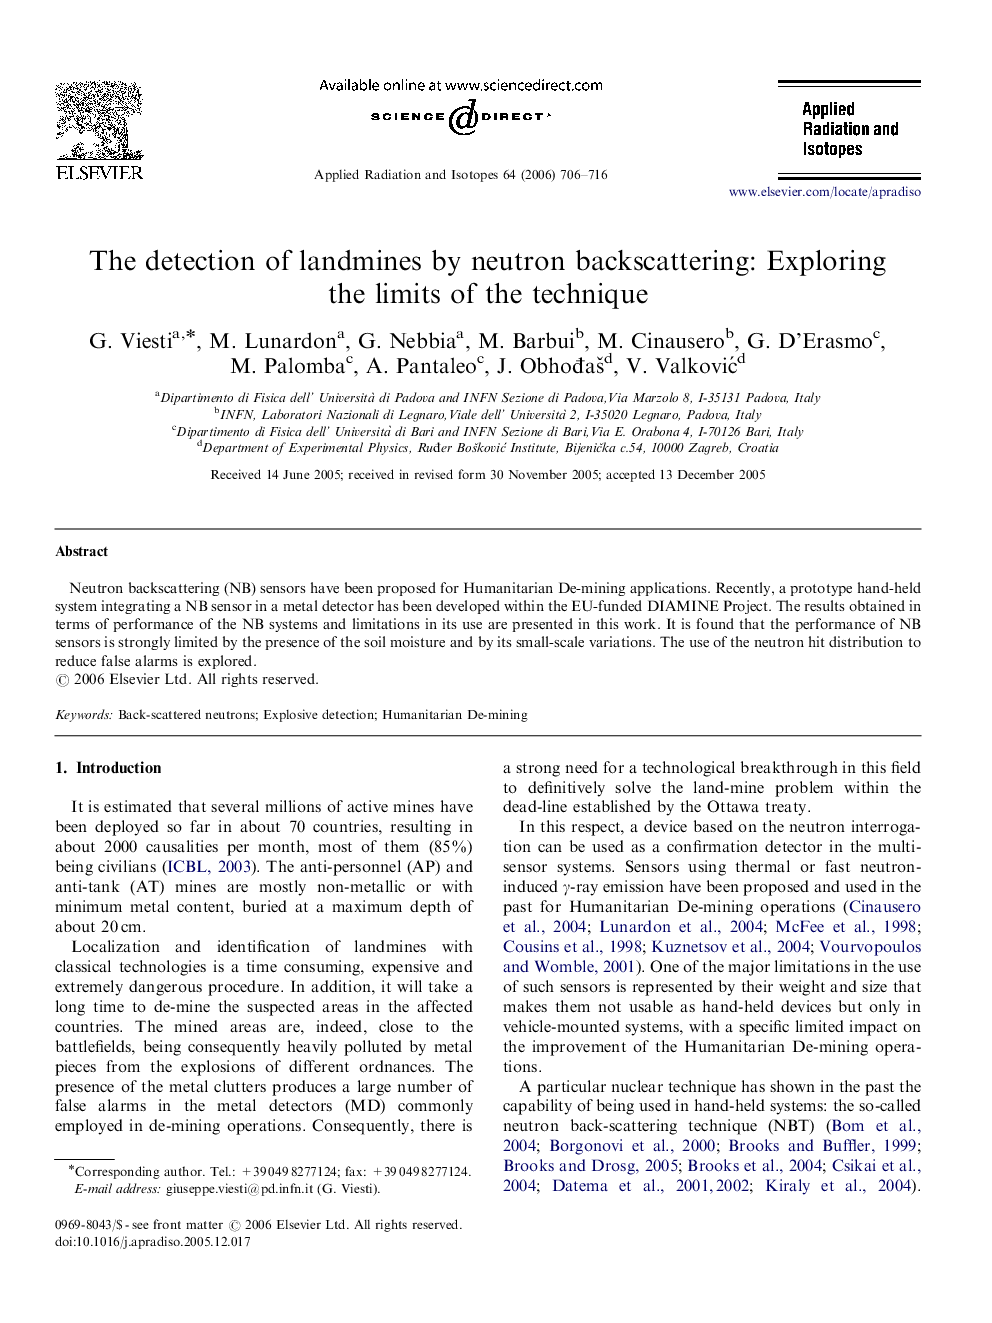 The detection of landmines by neutron backscattering: Exploring the limits of the technique